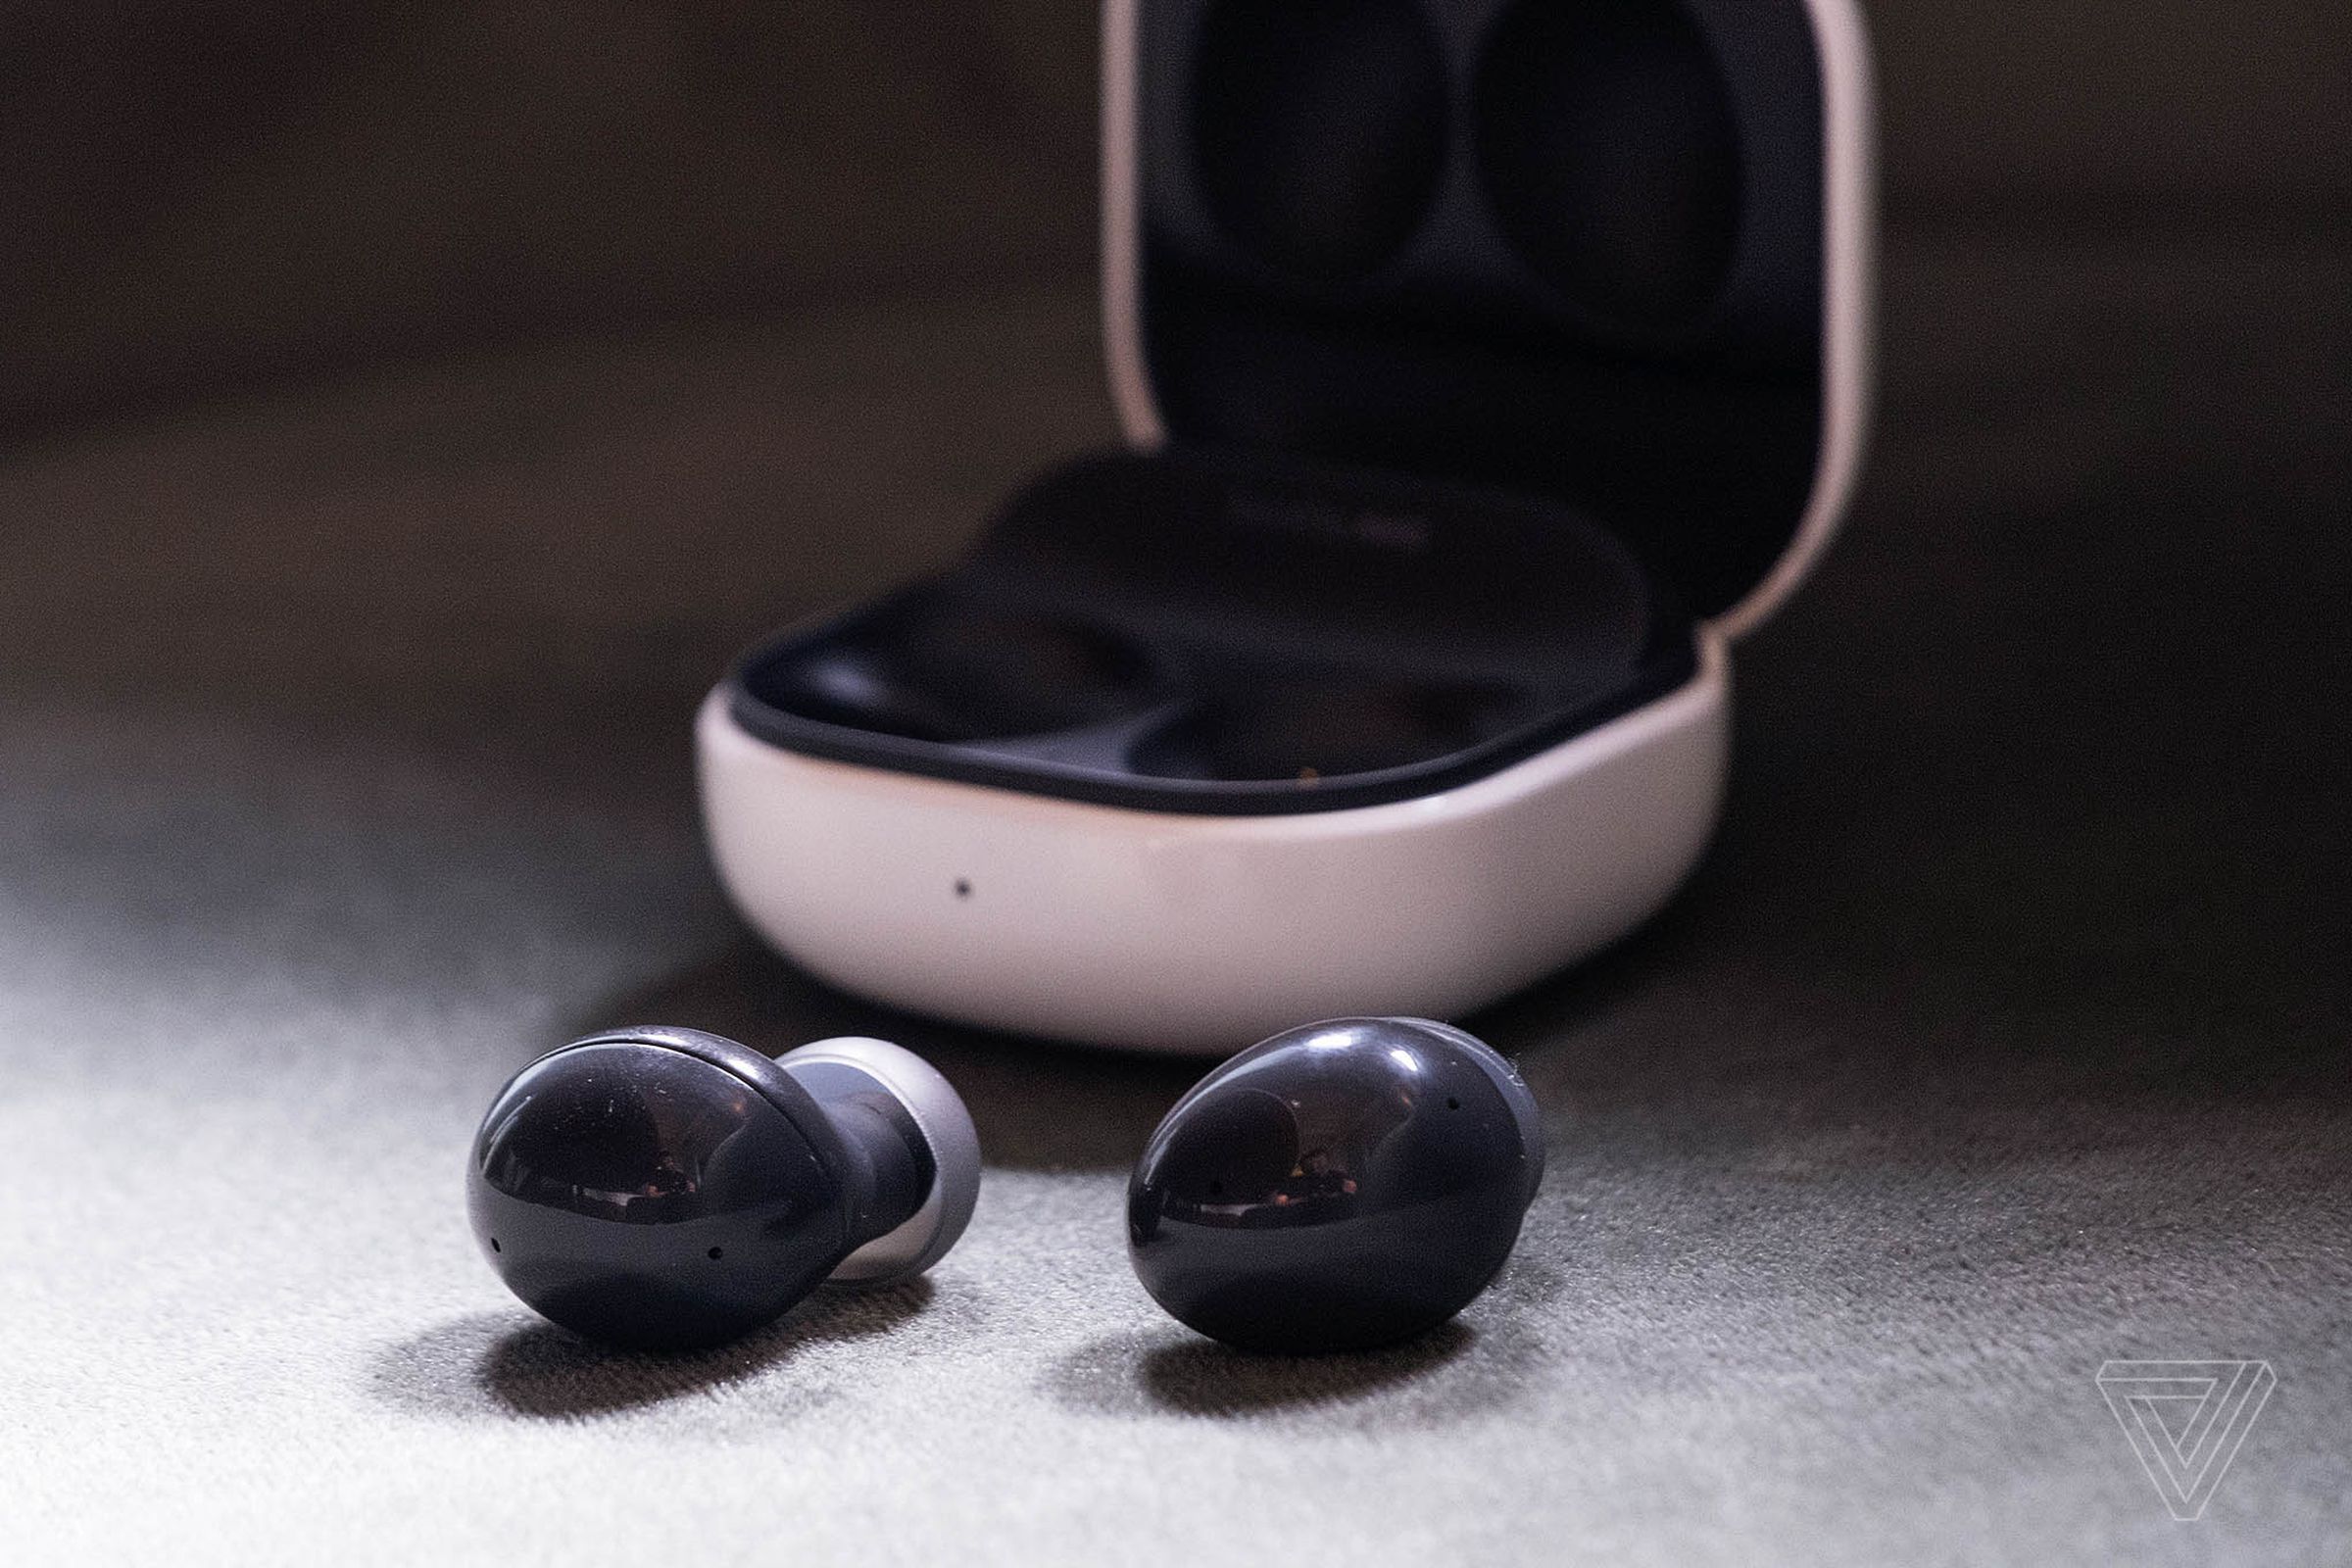 The Samsung Galaxy Buds 2 sitting outside their case.